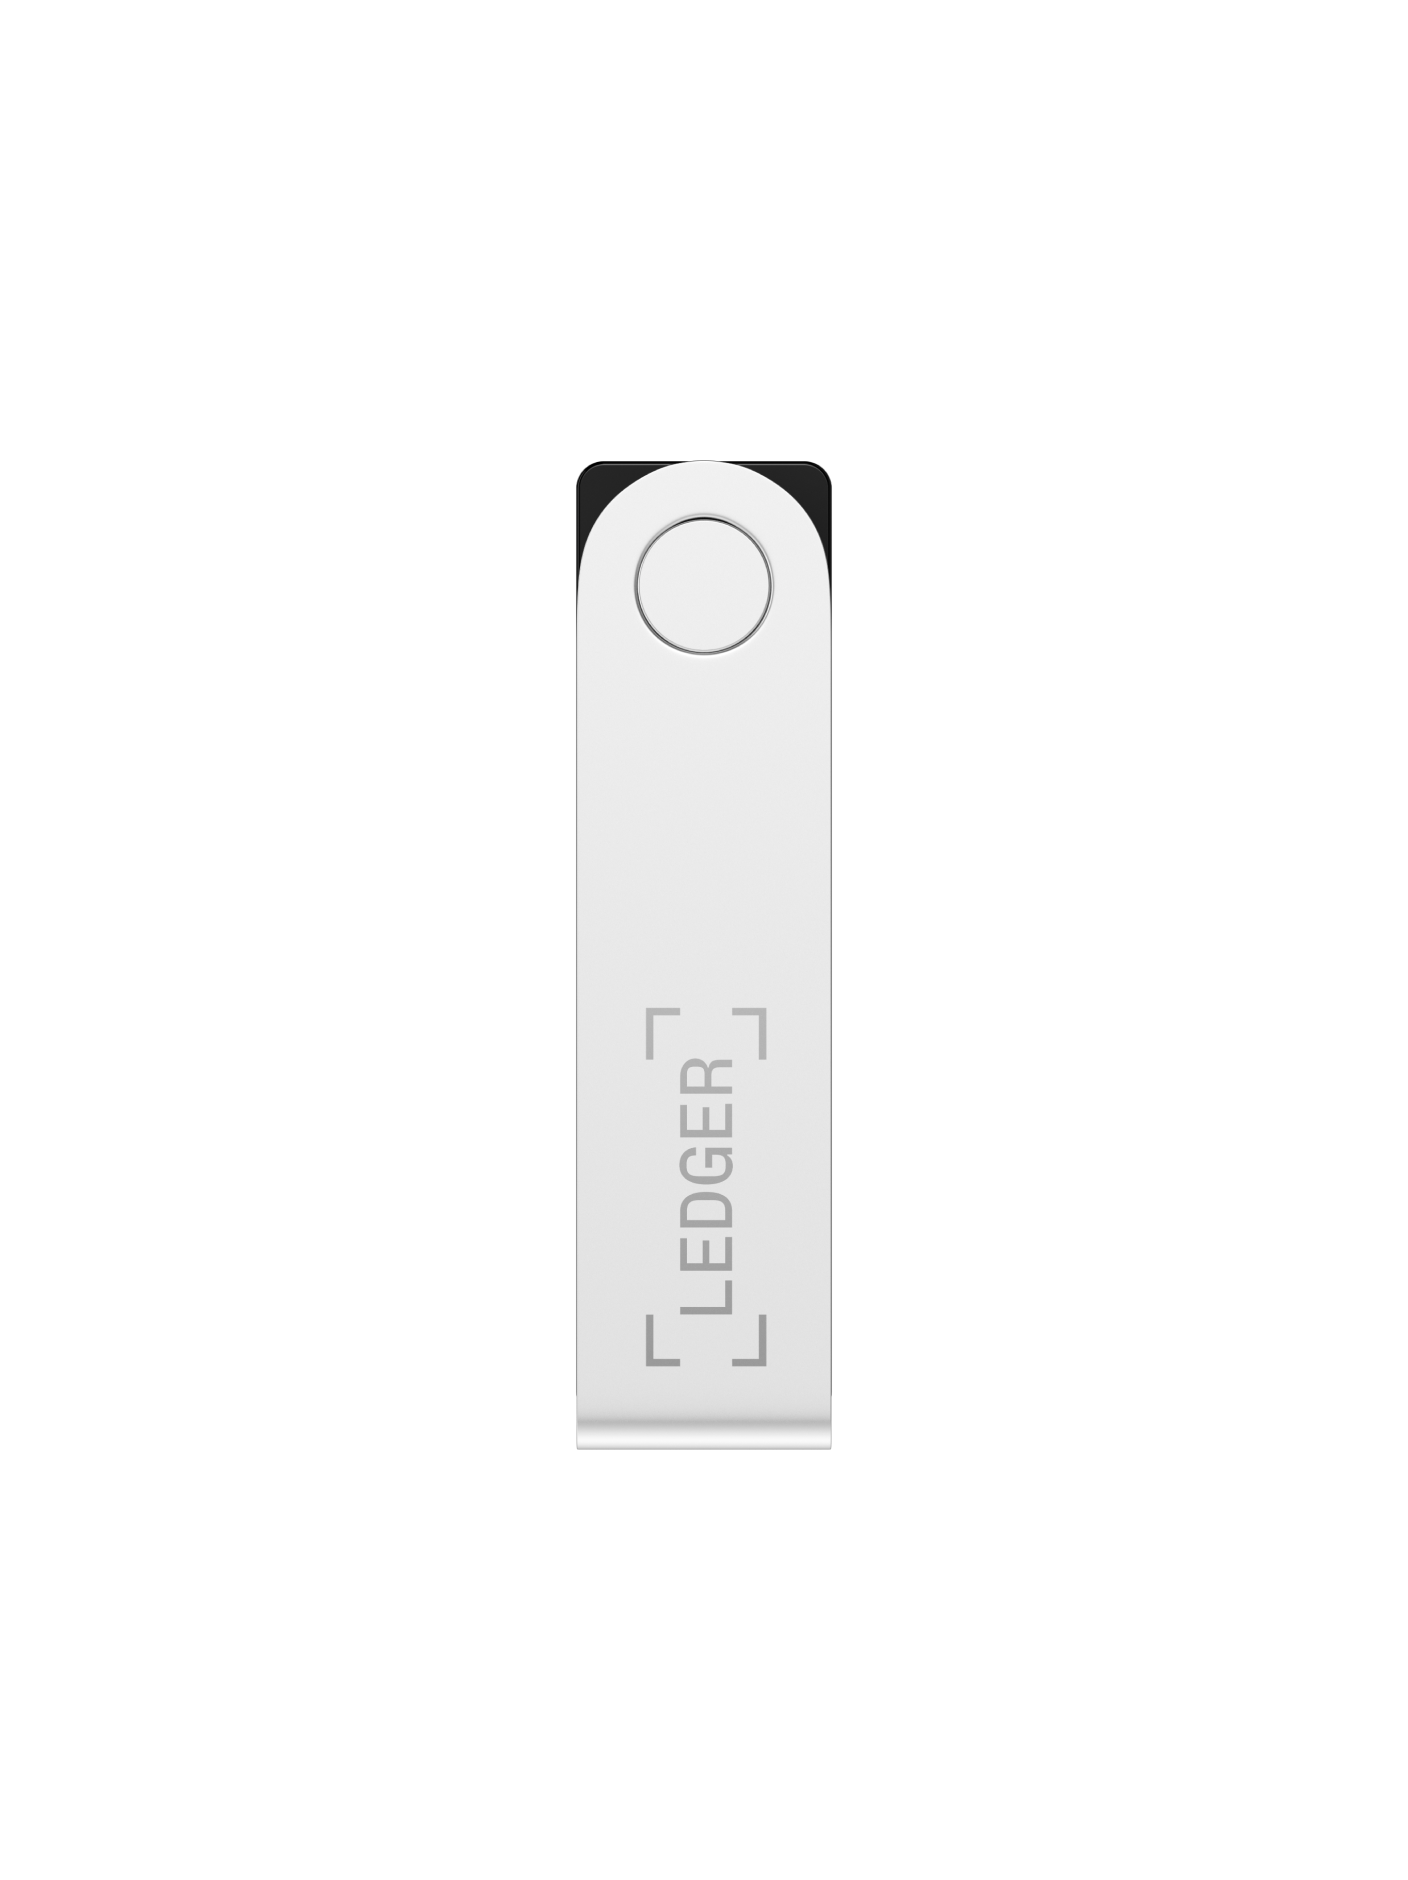 Fixing connection issues to Ledger nano - Bitcoin Freedom - Massimo Musumeci